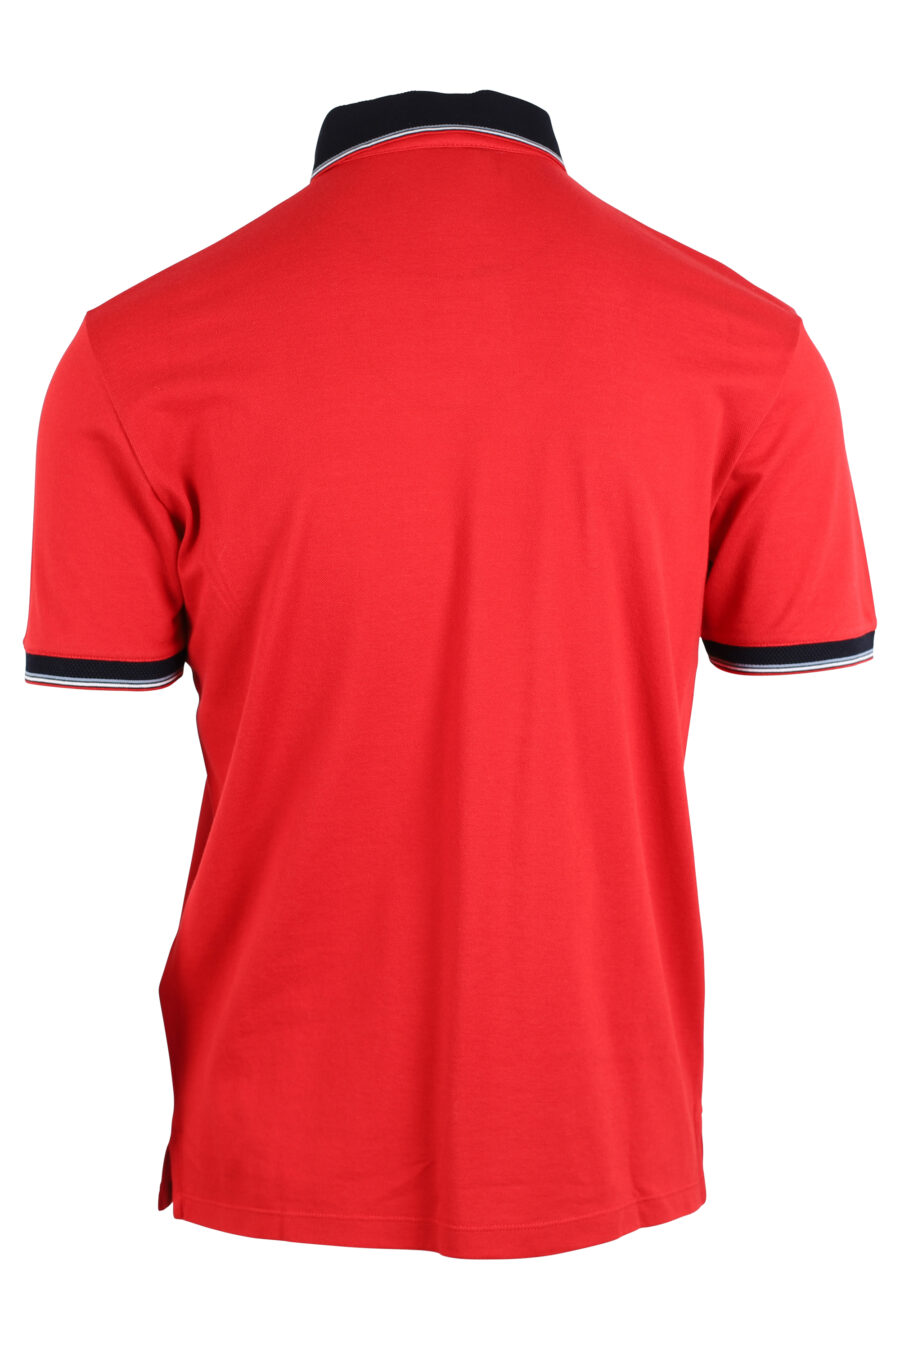 Red polo shirt with black and eagle mini logo - IMG 4745